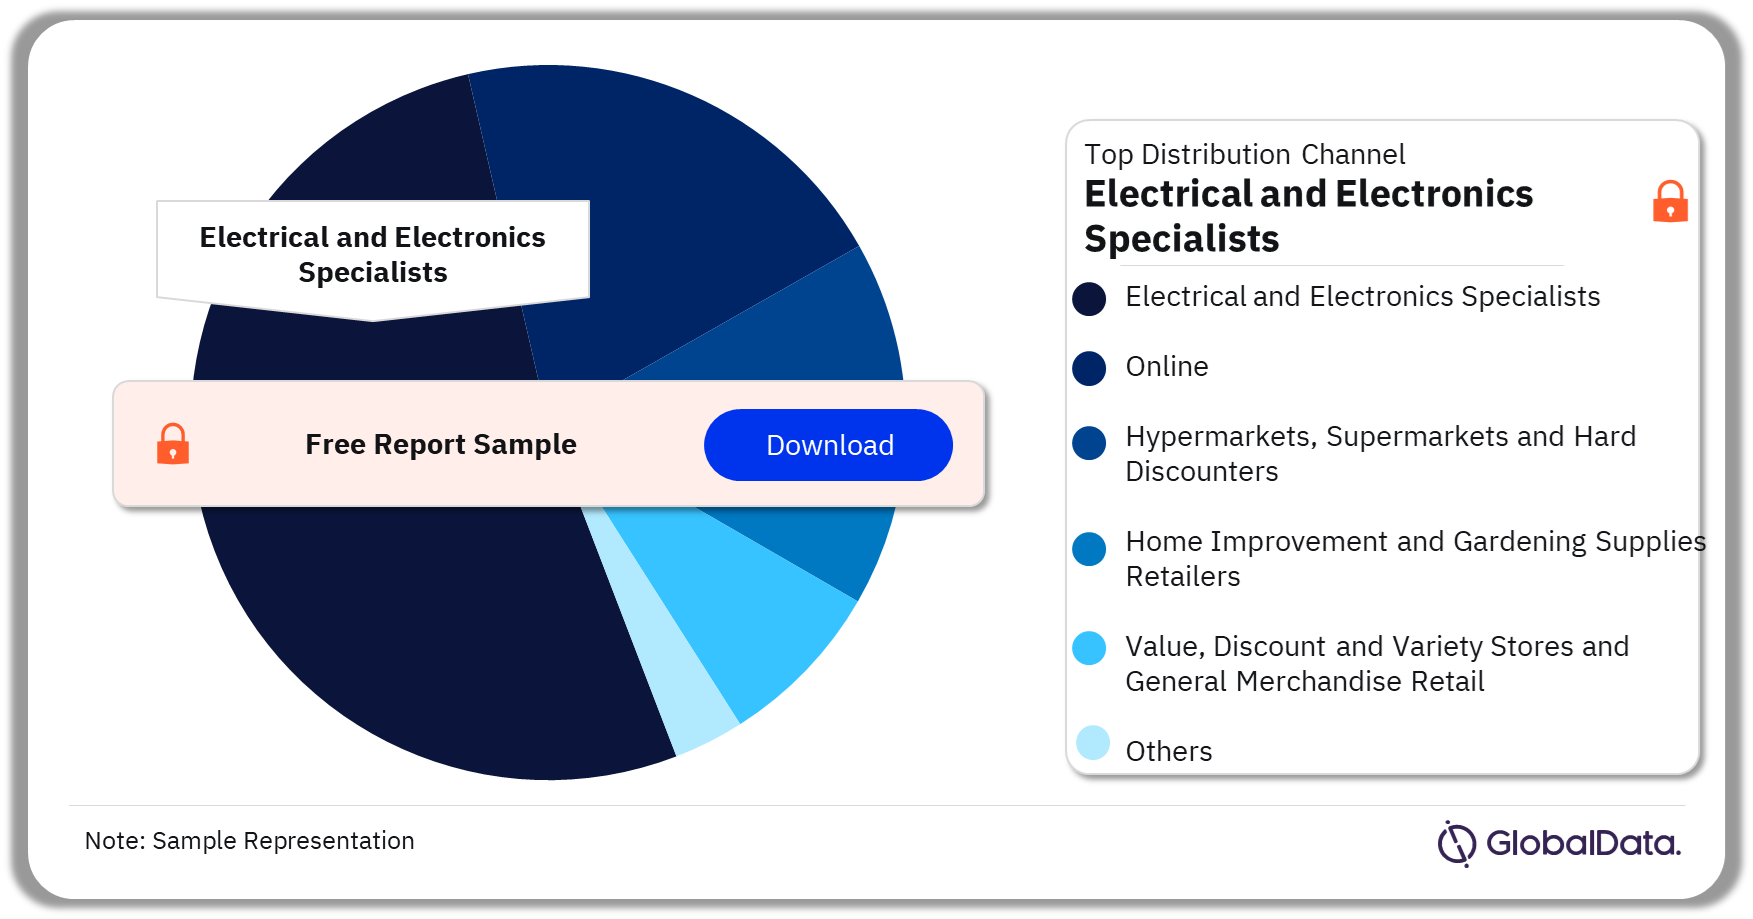 Europe Electricals Retailing Market Analysis by Channels, 2022 (%)